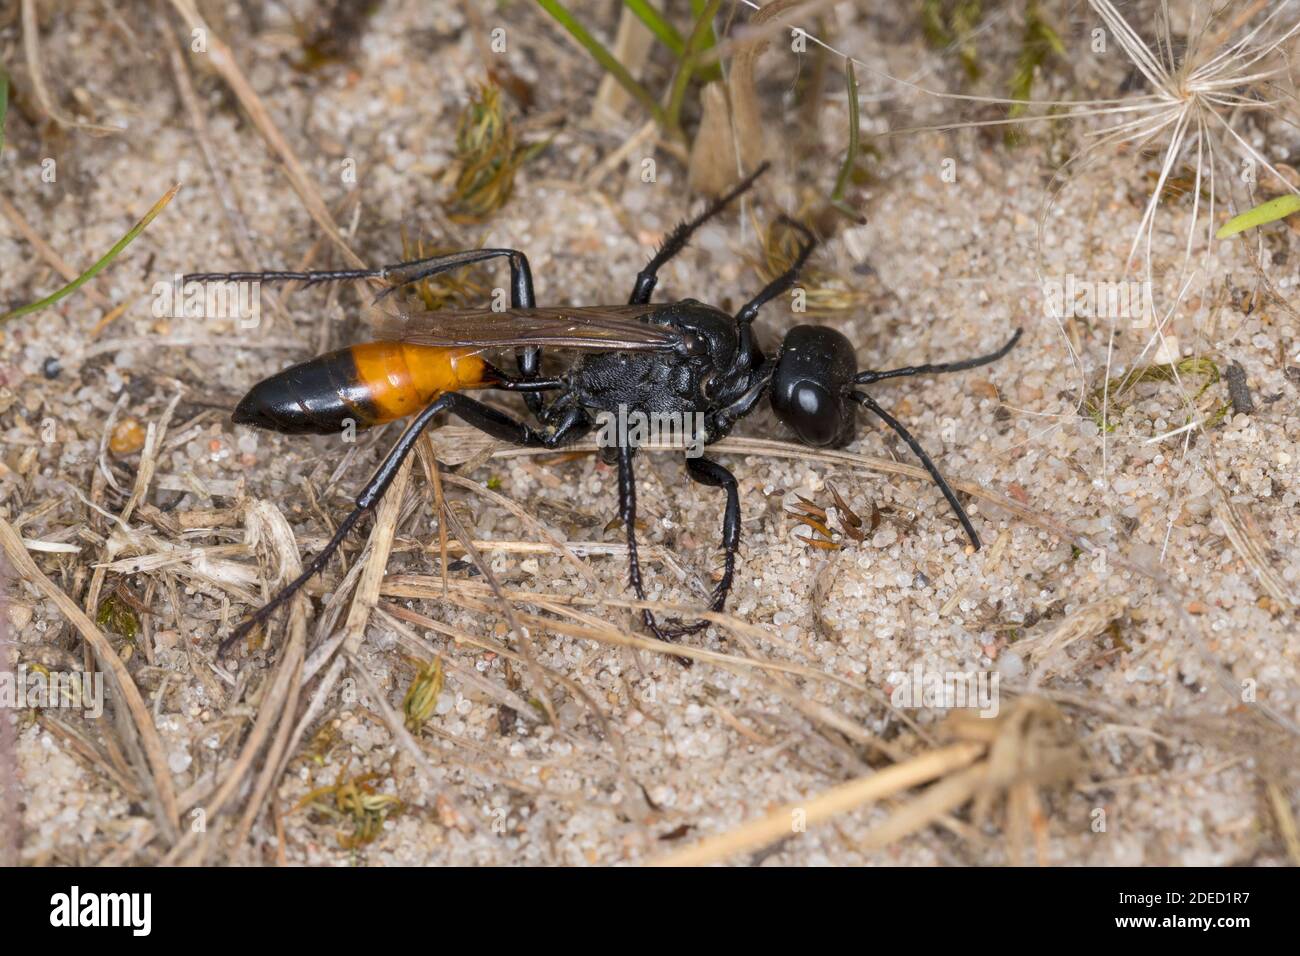 digger wasp, digger-wasp, thread-waisted wasp (Podalonia cf. affinis, Sphex cf. lutaria, Ammophila cf. affinis), on sandy ground, Germany Stock Photo